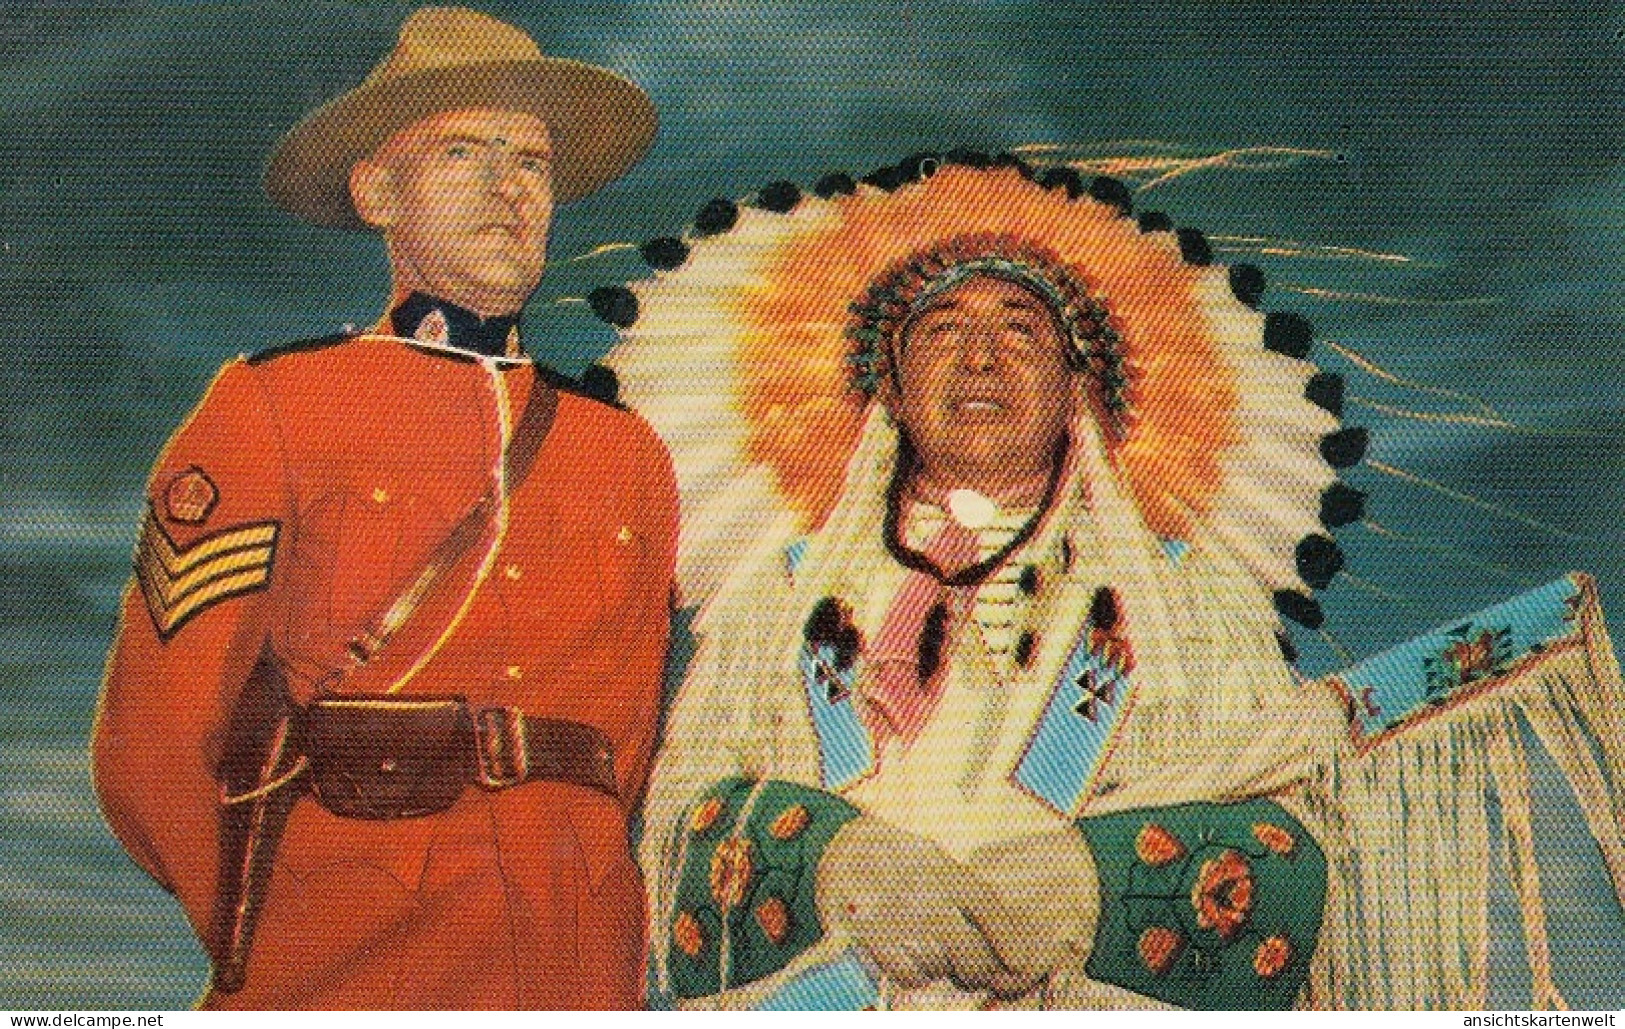 Indien Chief And Royal Canadian Mounted Police Ngl #F0478 - Non Classés